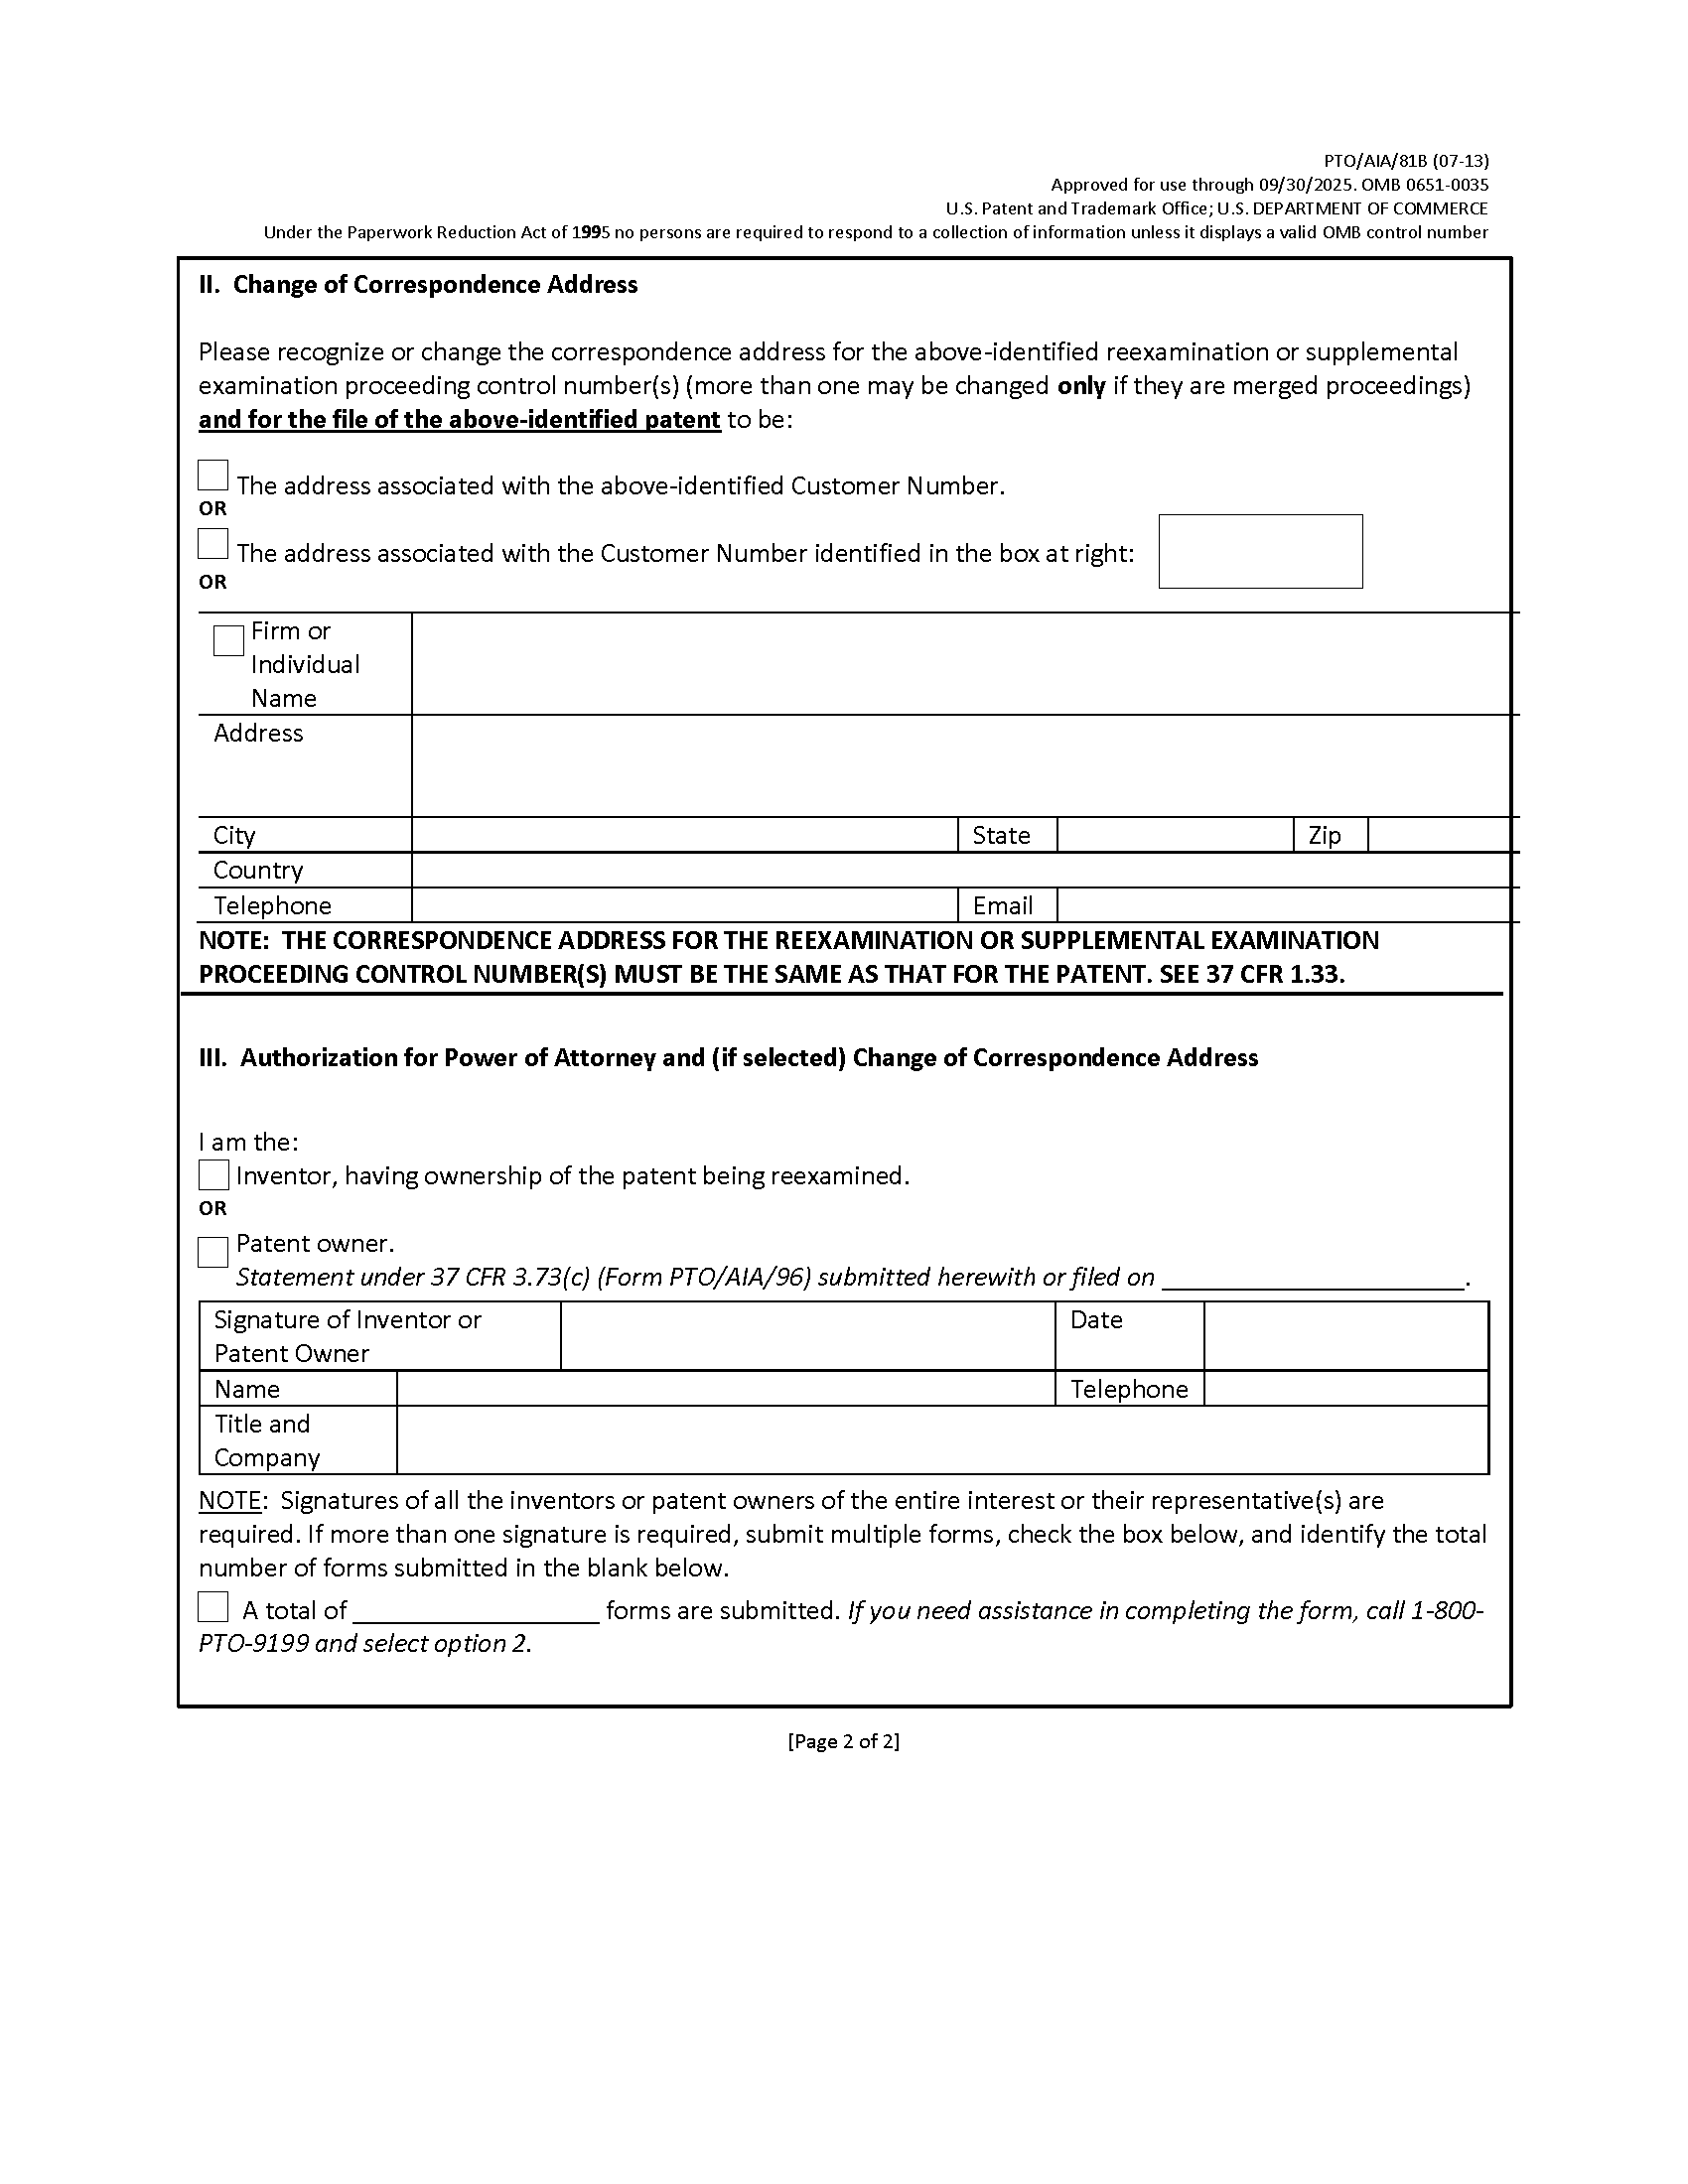 Form PTO/AIA/81B. Page 2. For changing a power of attorney and/or a correspondence address in a supplemental examination proceeding and, if desired, simultaneously in the file of the patent.